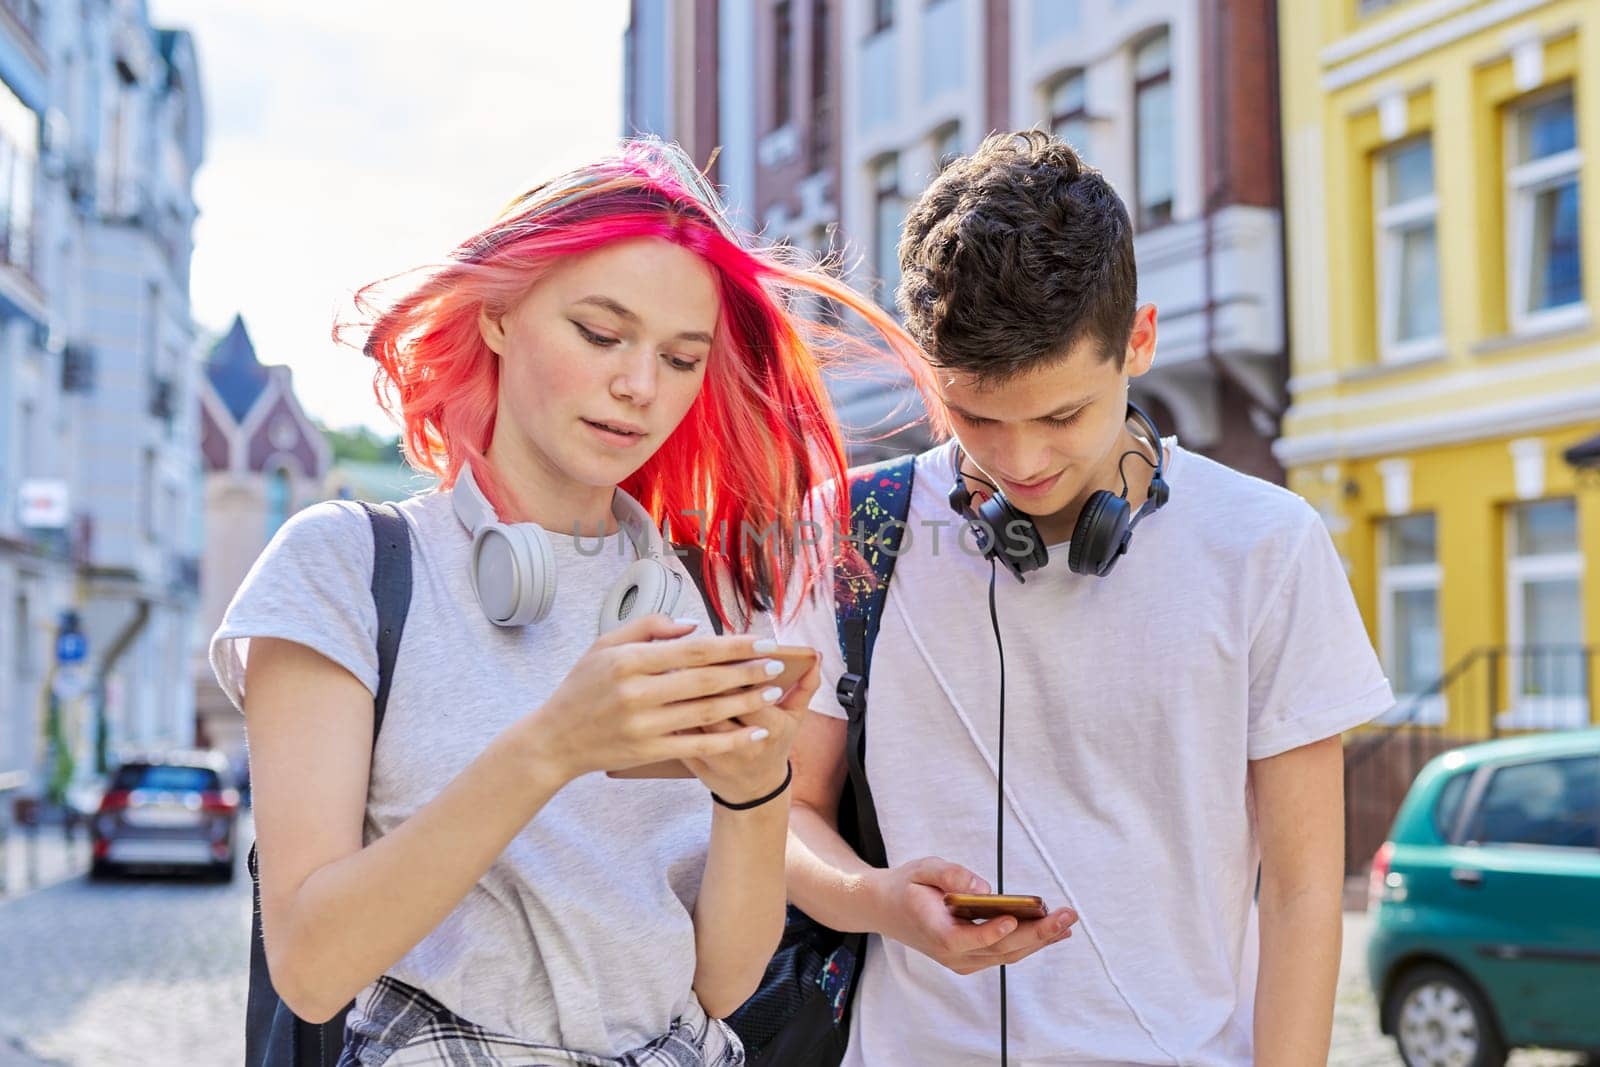 Fashionable modern youth, lifestyle, technology, urban style. Couple of trending teenagers friends with smartphone on city street